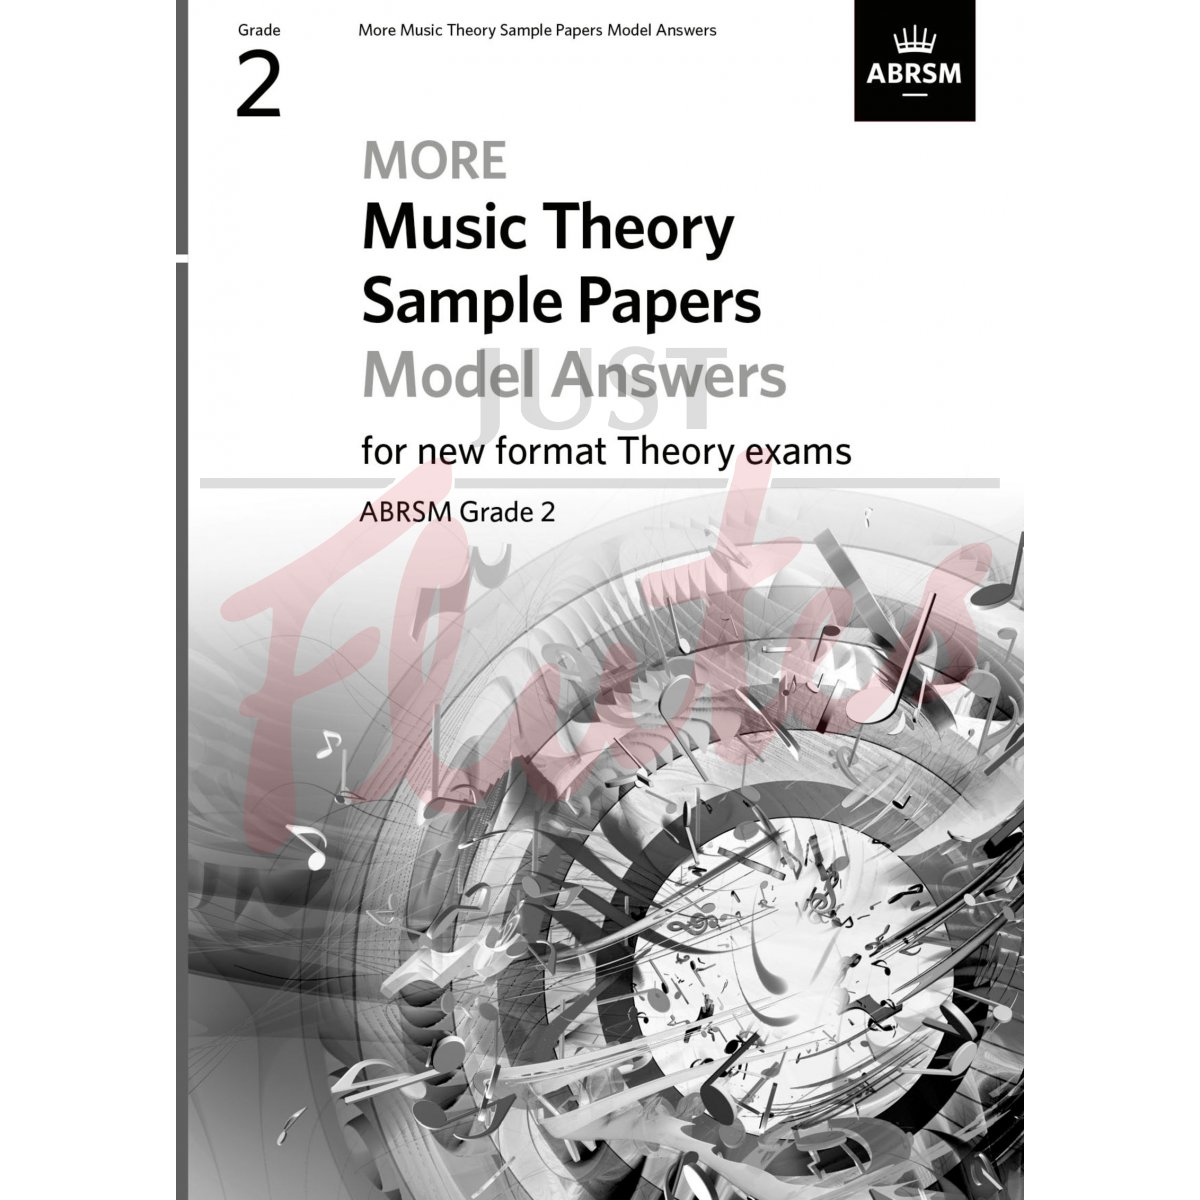 More Music Theory Sample Papers Grade 2 Model Answers